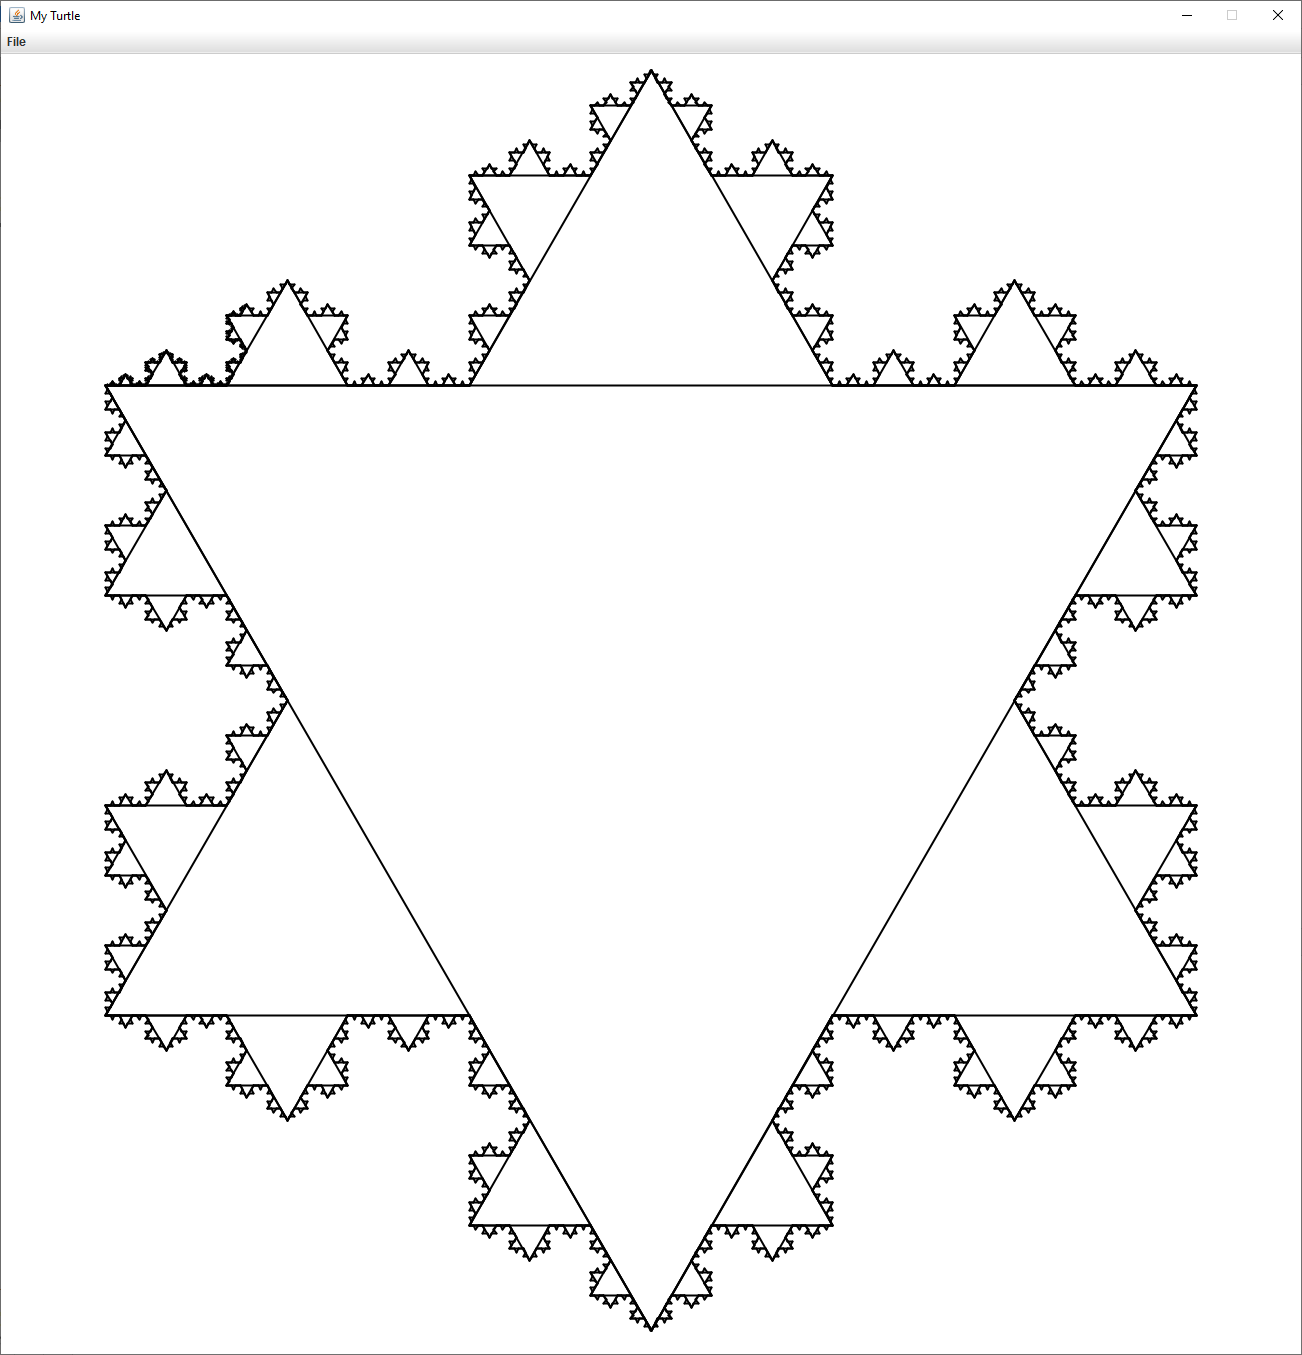 A Koch Snowflake, a triangle with triangles one-third the size along each edge, recursively.